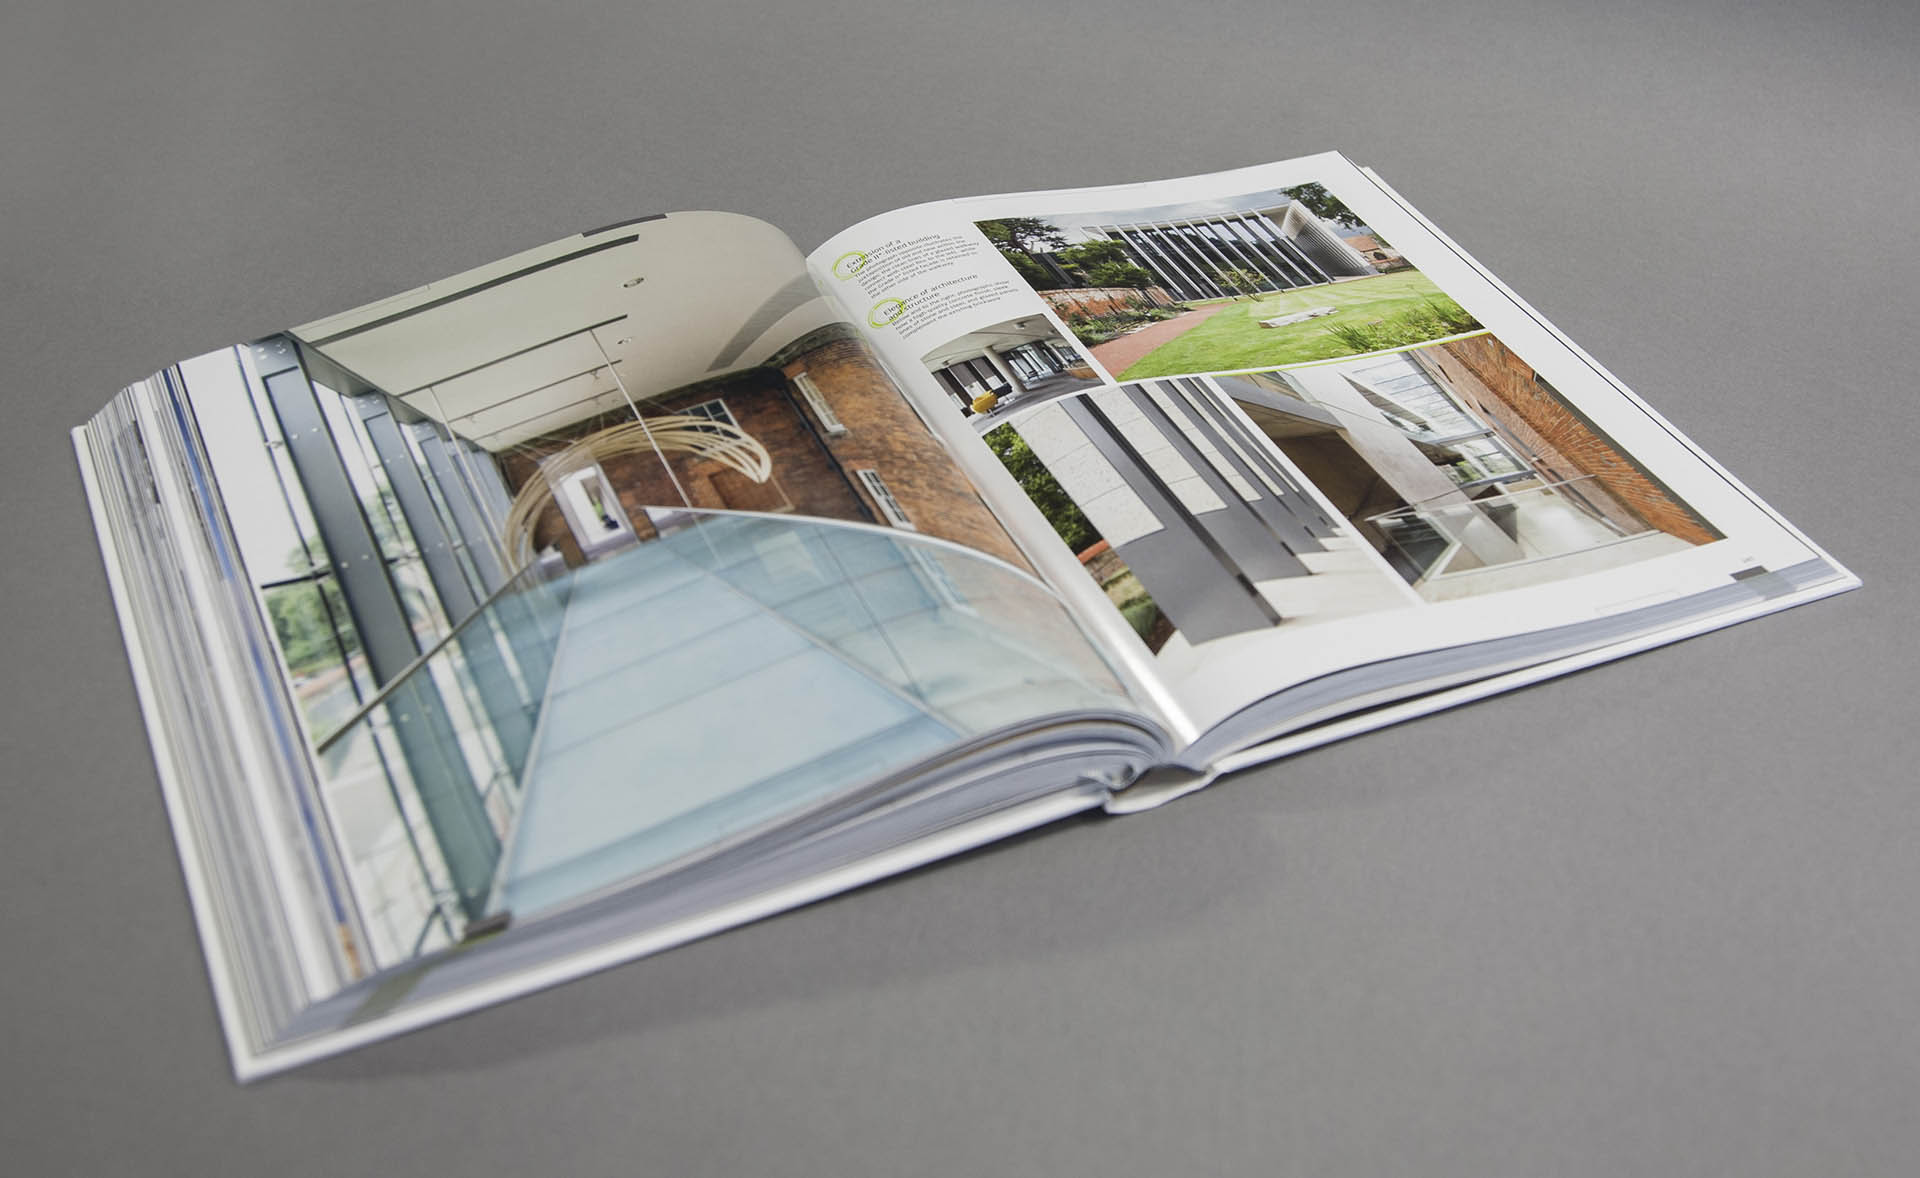 Double spread for deliverance of Design, featuring 1 of 58 selected international projects produced over 20 years